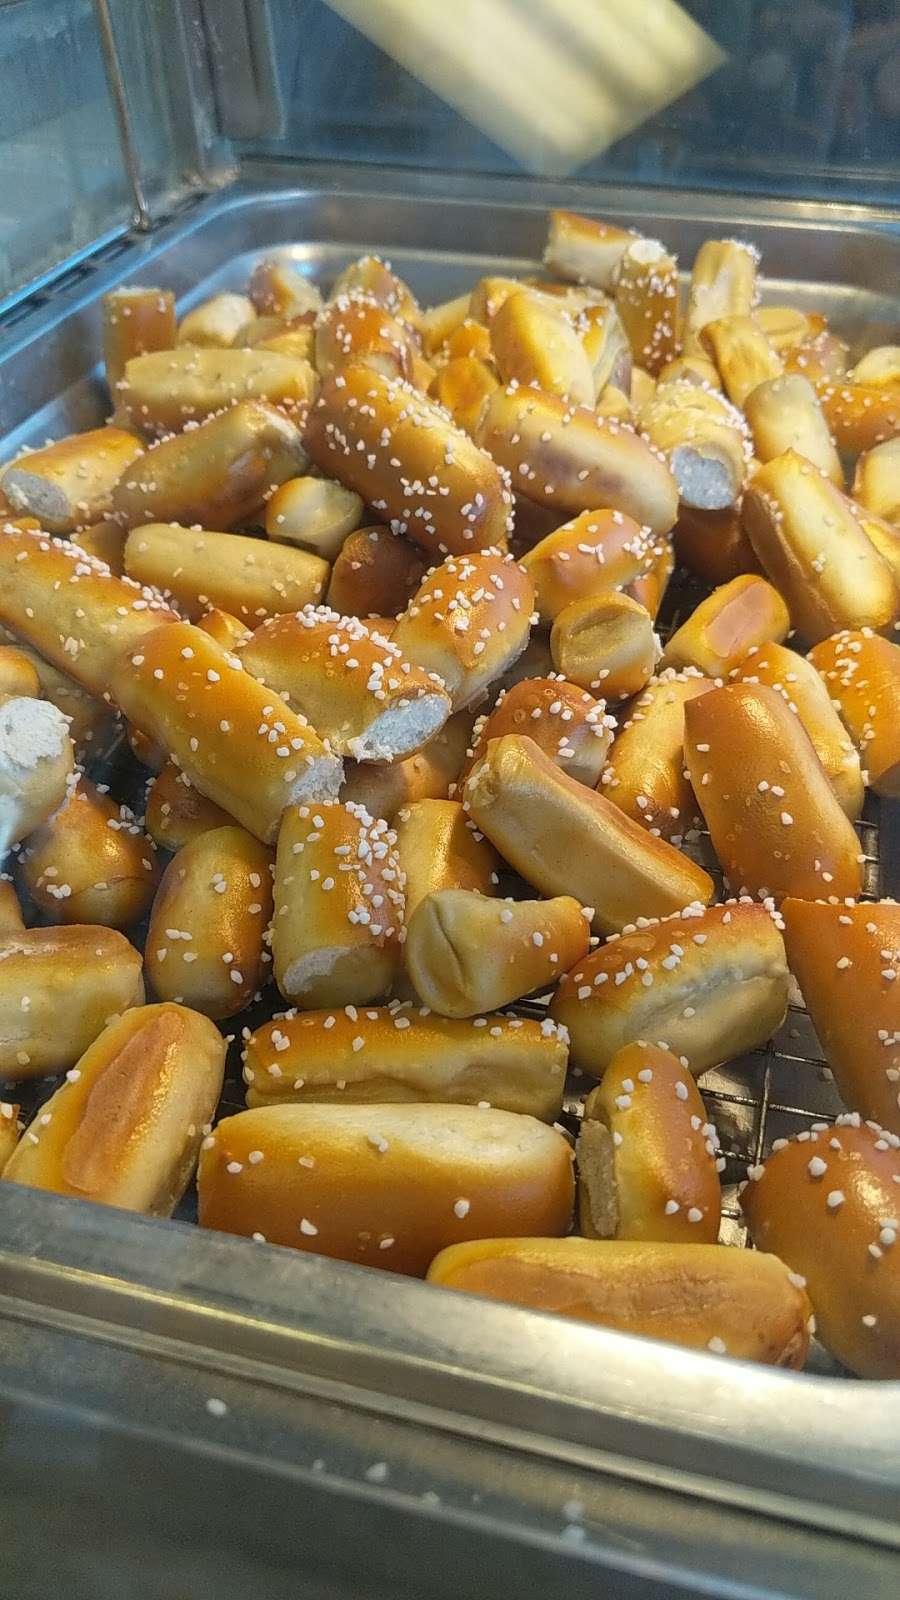 Philly Pretzel Factory - store  | Photo 2 of 2 | Address: 220 Wilmington West Chester Pike, Chadds Ford, PA 19317, USA | Phone: (610) 459-3150